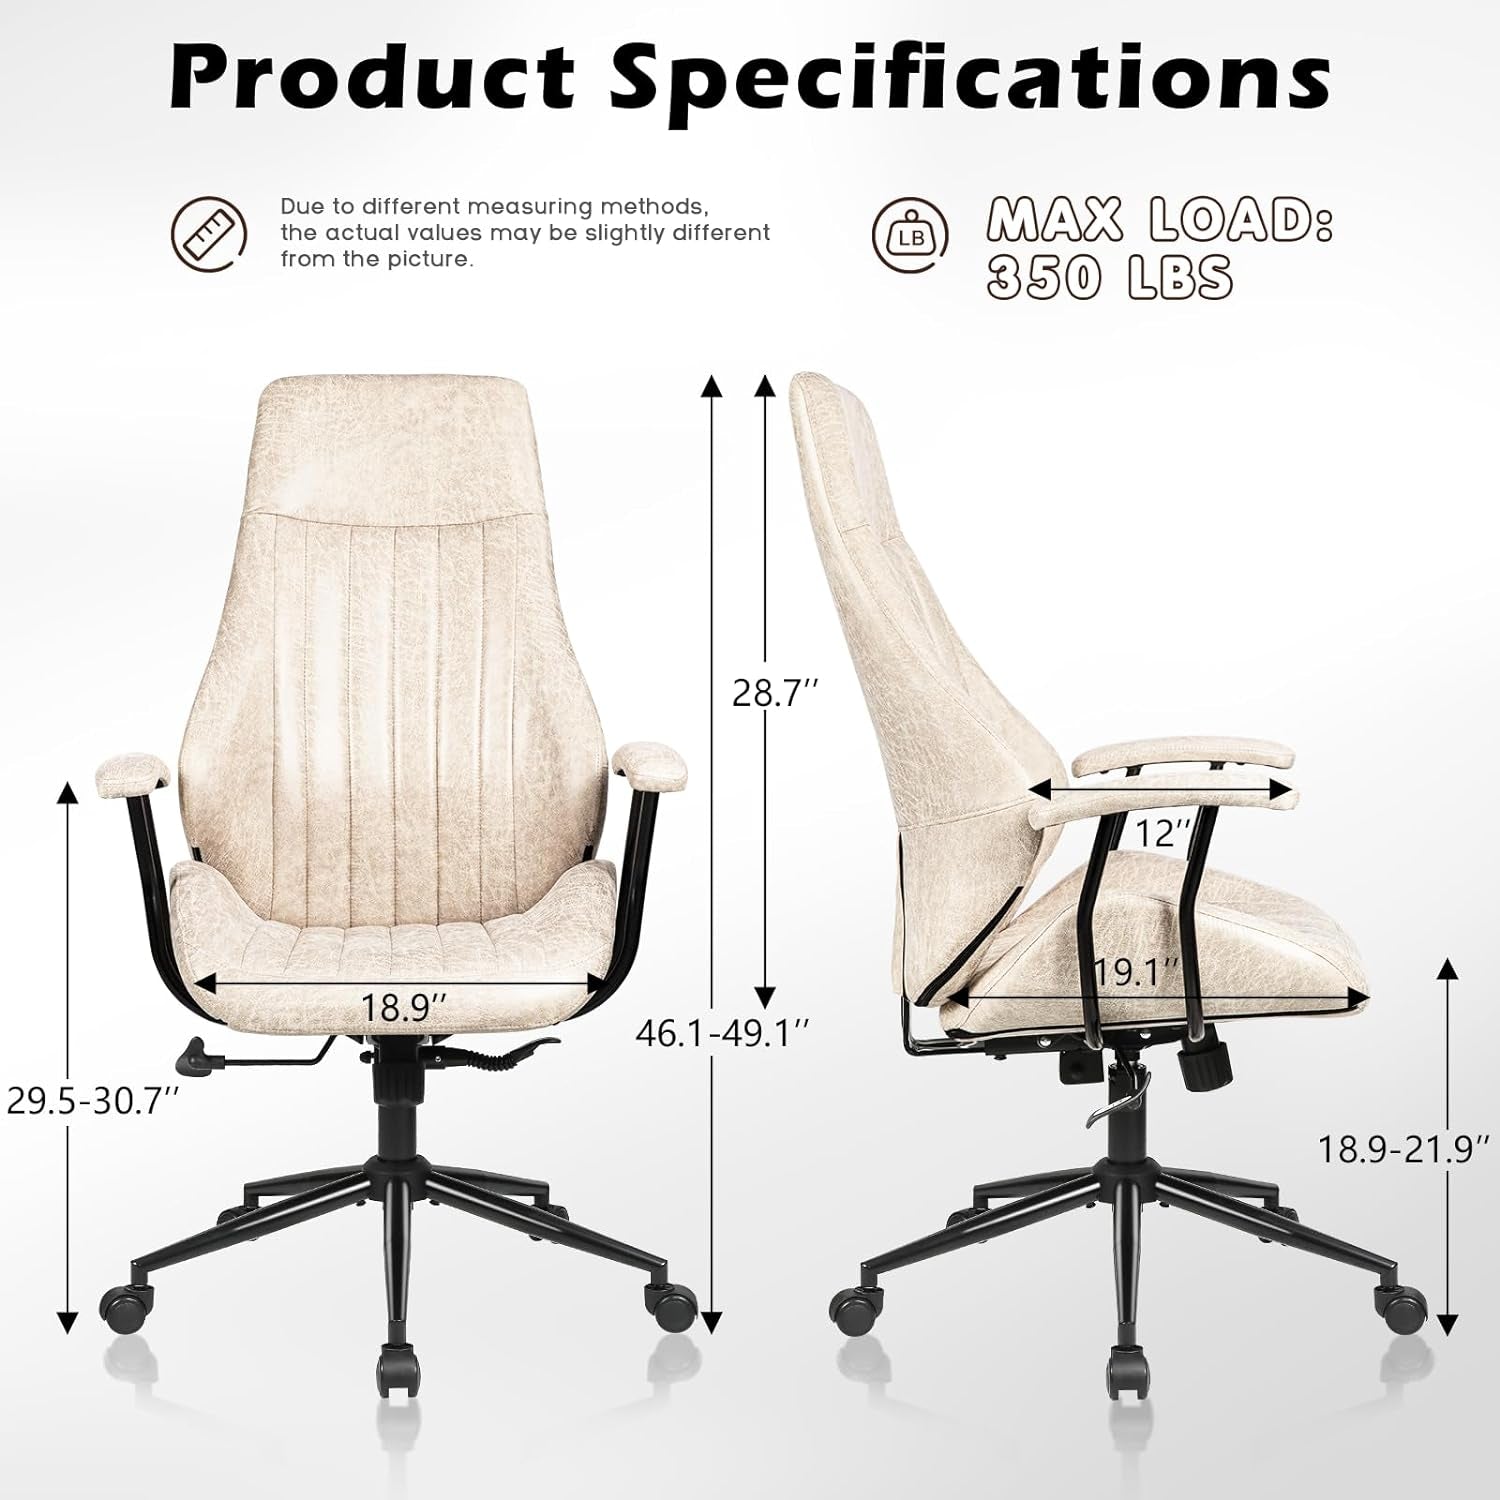 Leather Office Chair,Computer Chair,Computer Desk Chair,Morden Ergonomic Desk Chair,High Back Desk Chair,Height Adjustable Suede Fabric Executive Chair with Padded Armrest (Beige)